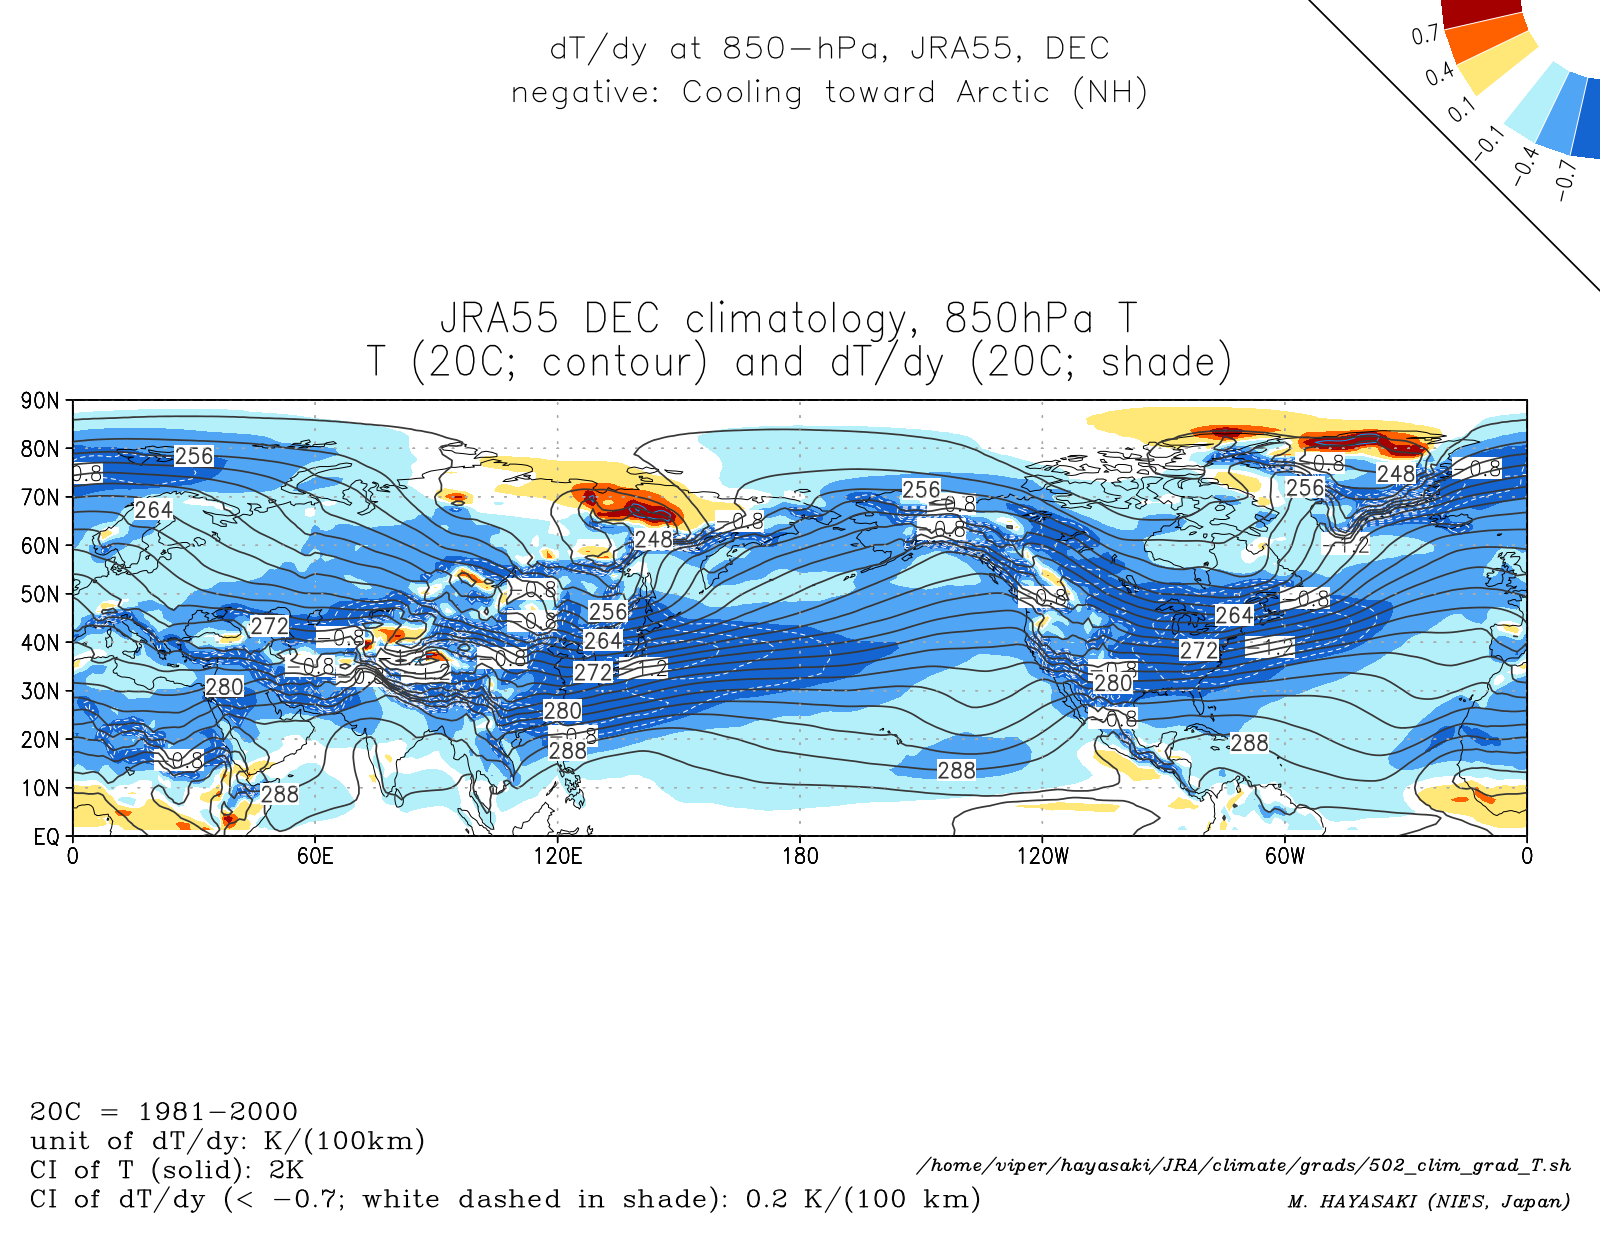 Monthly climatology (Dec) of dT/dy at 850-hPa in the NH